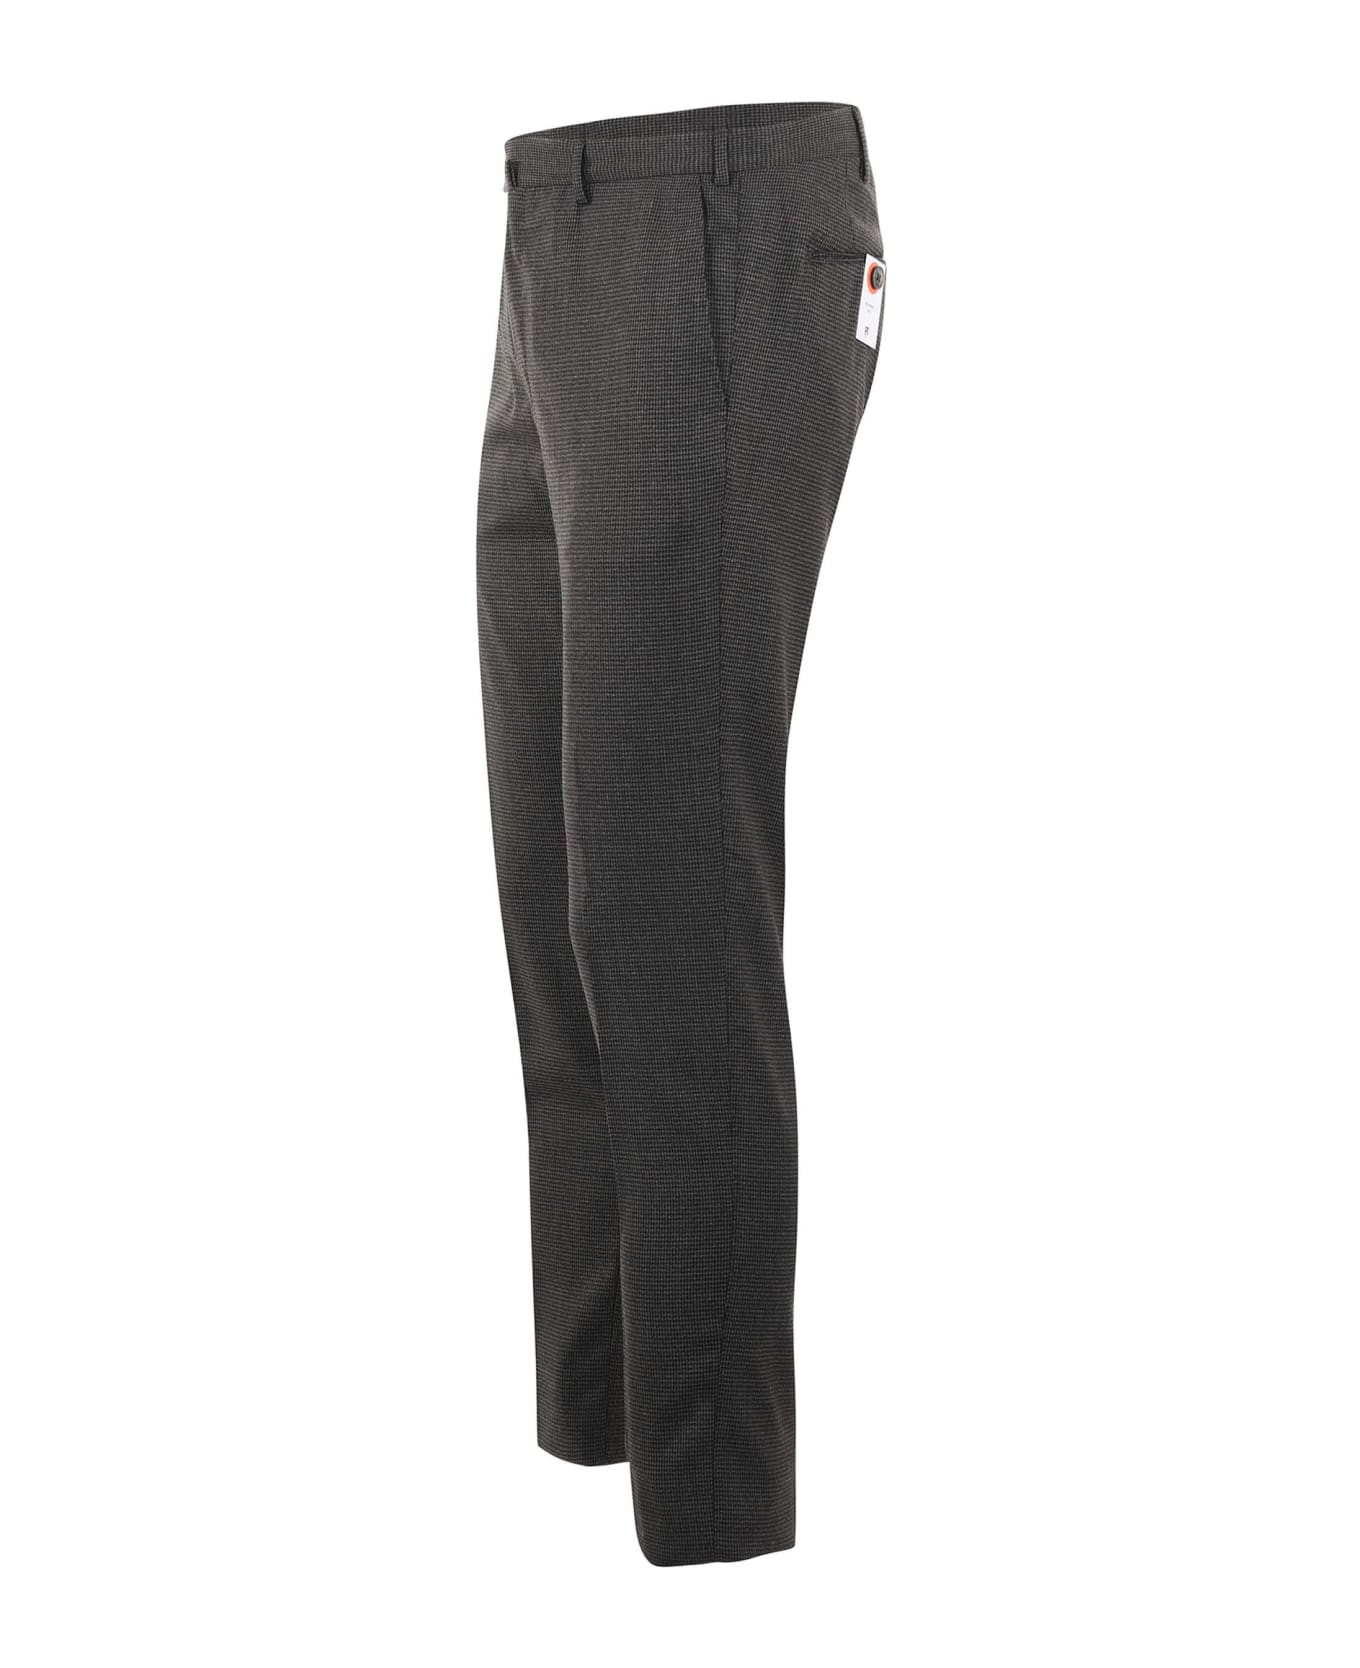 PT Torino Pt01 Trousers In Stretch Wool Blend - Marrone ボトムス